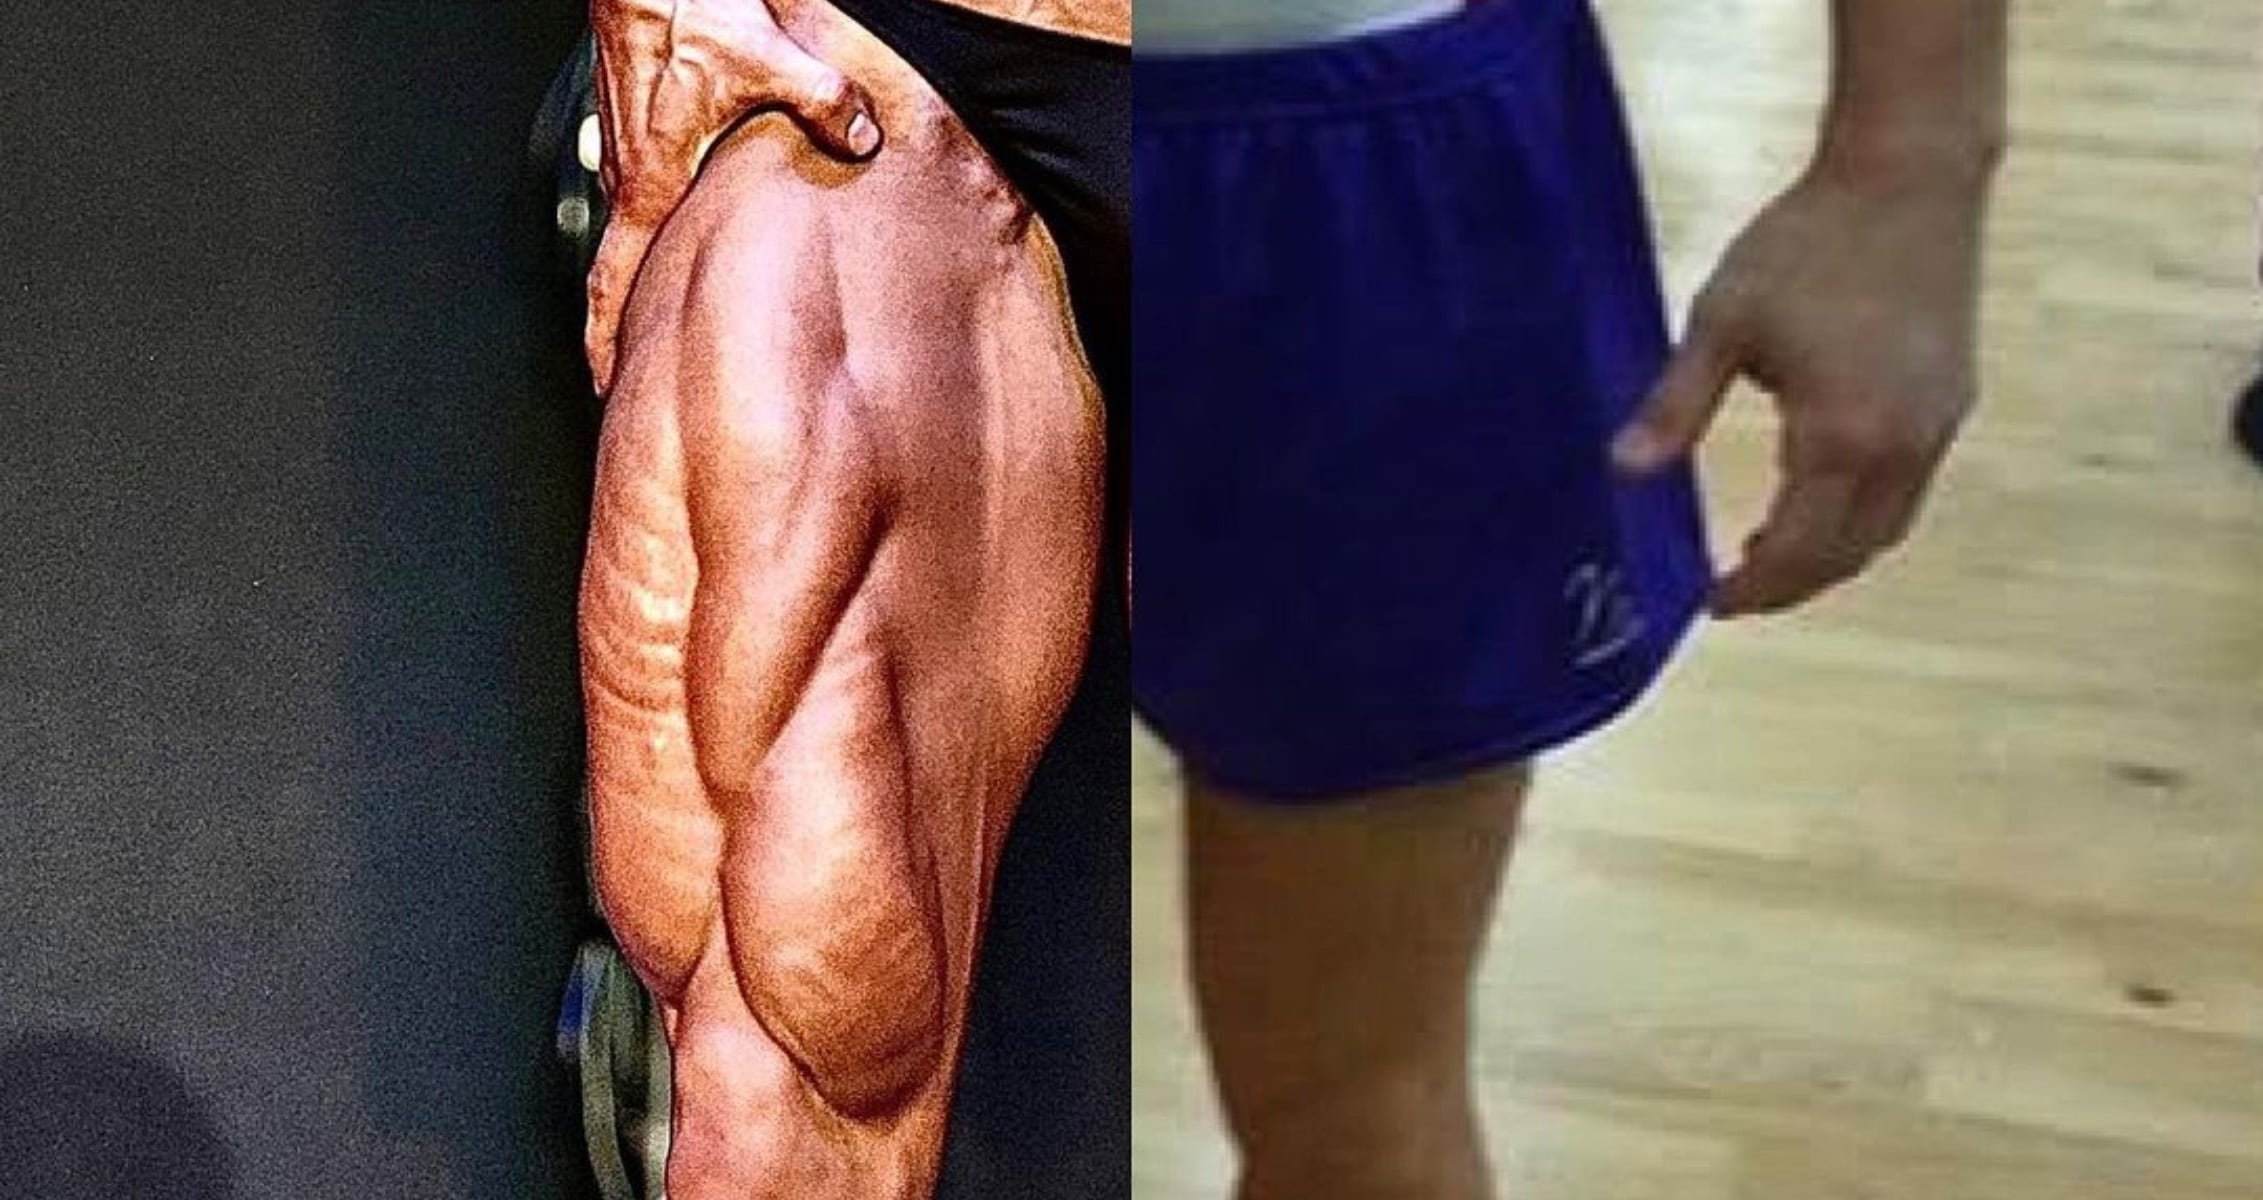 grens Jumping jack Zich afvragen PNBA Mitch Jarvis On Why You Shouldn't Blame Genetics for Skinny Legs -  Generation Iron Fitness & Strength Sports Network